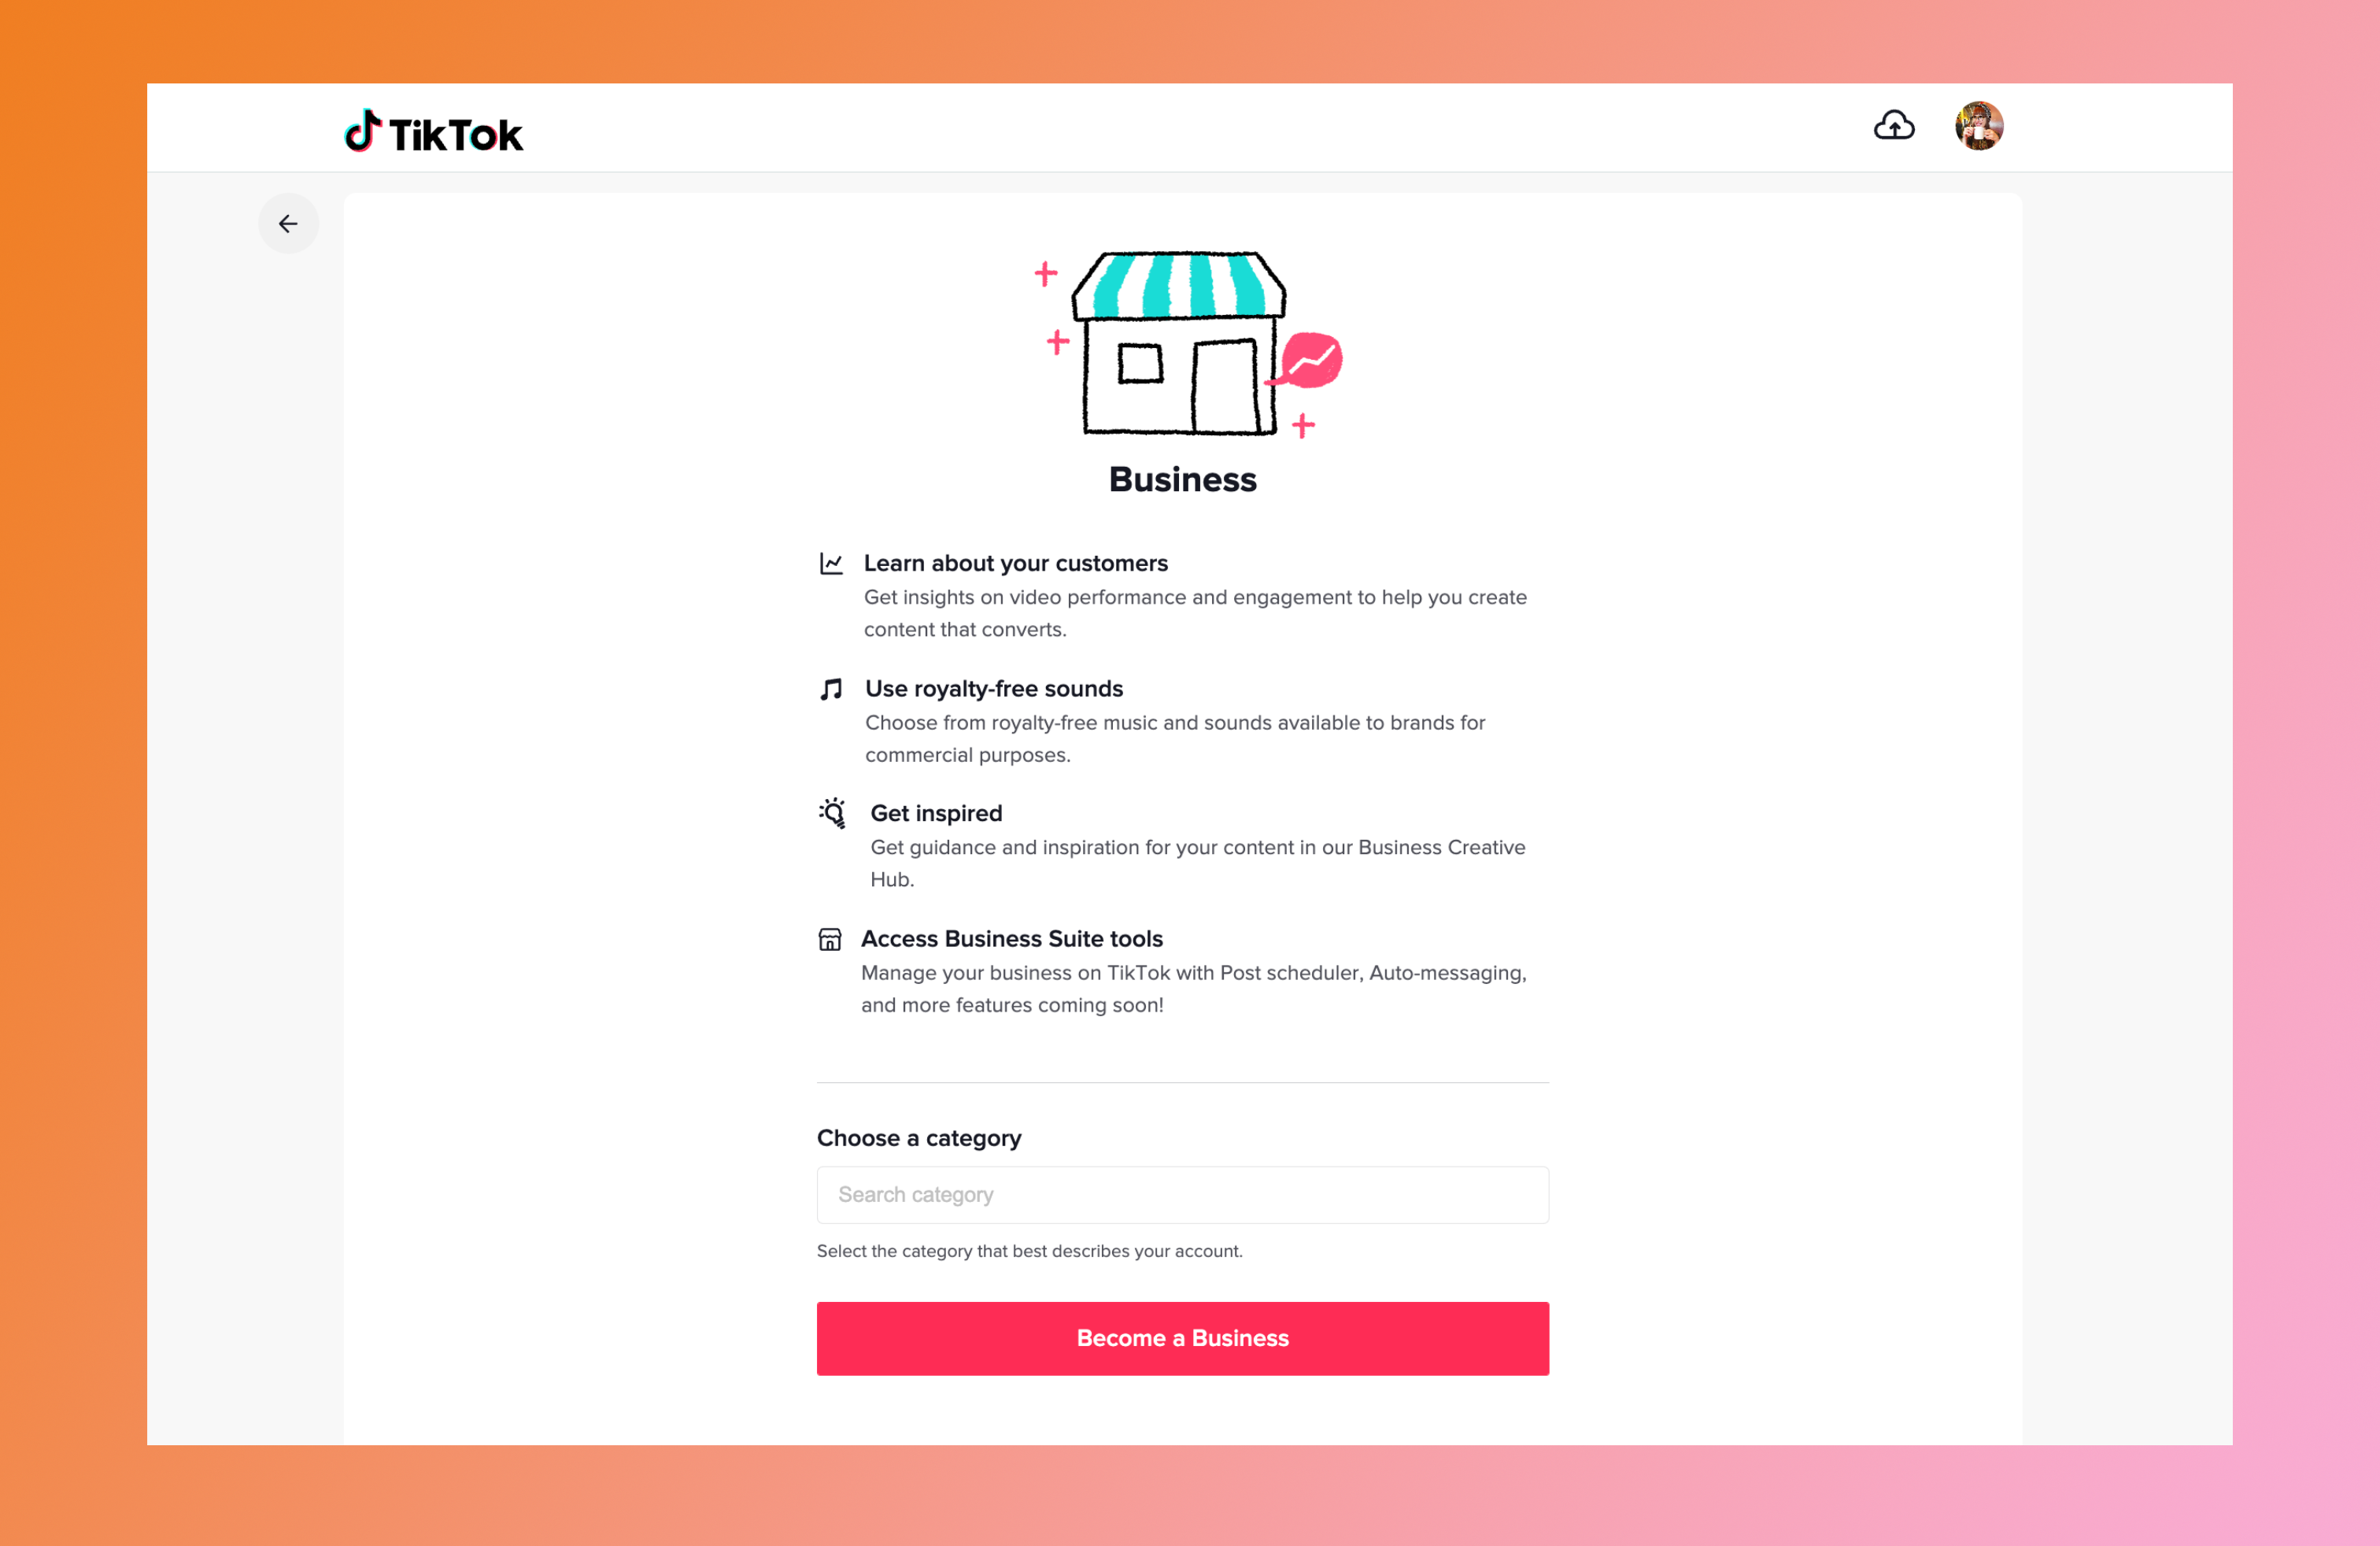 TikTok interface showing the business account sign up page